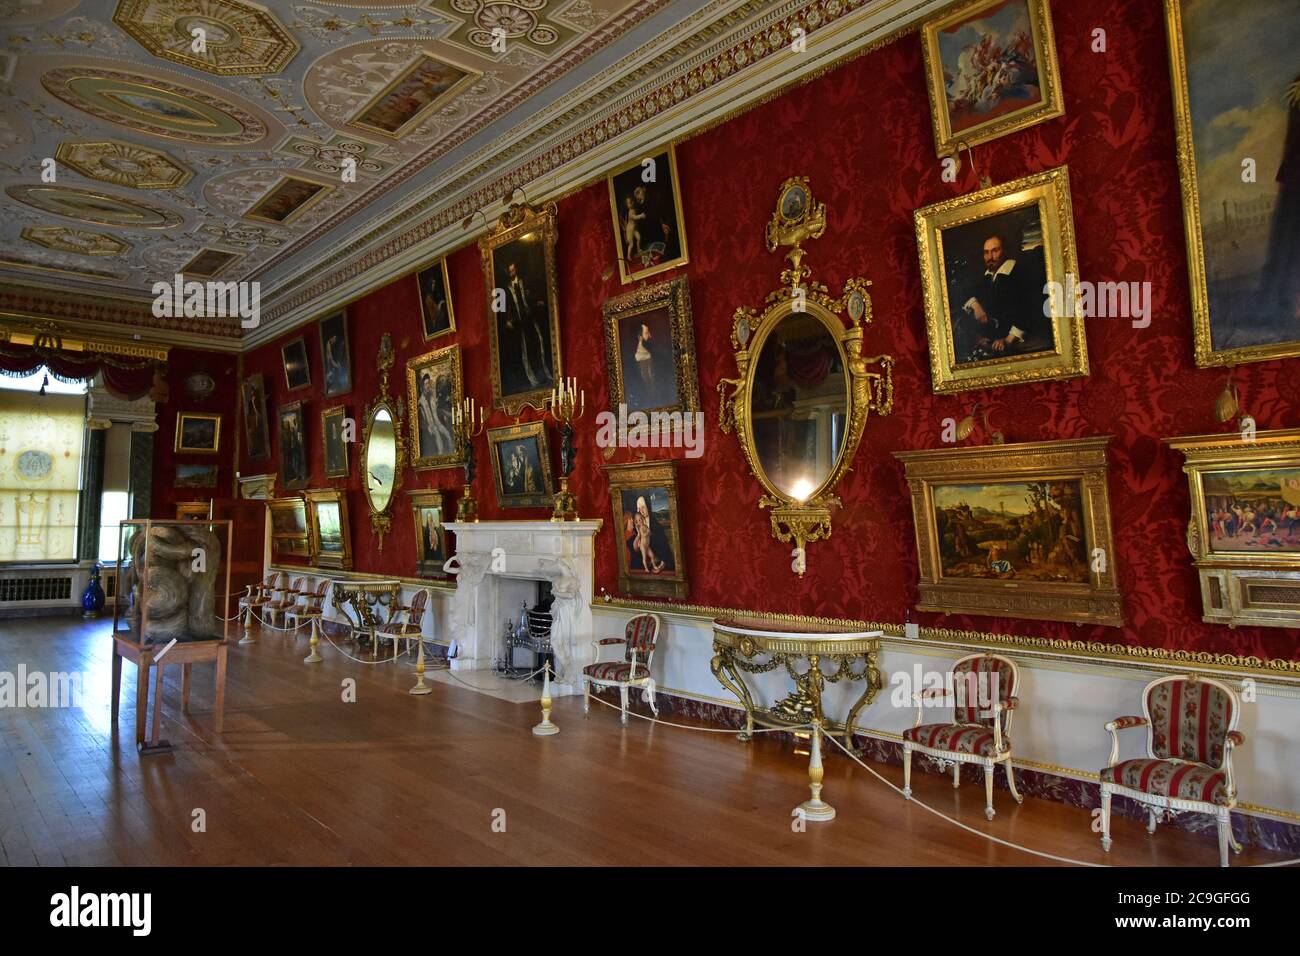 The Great Hall, Harewood House, West Yorkshire Stock Photo - Alamy